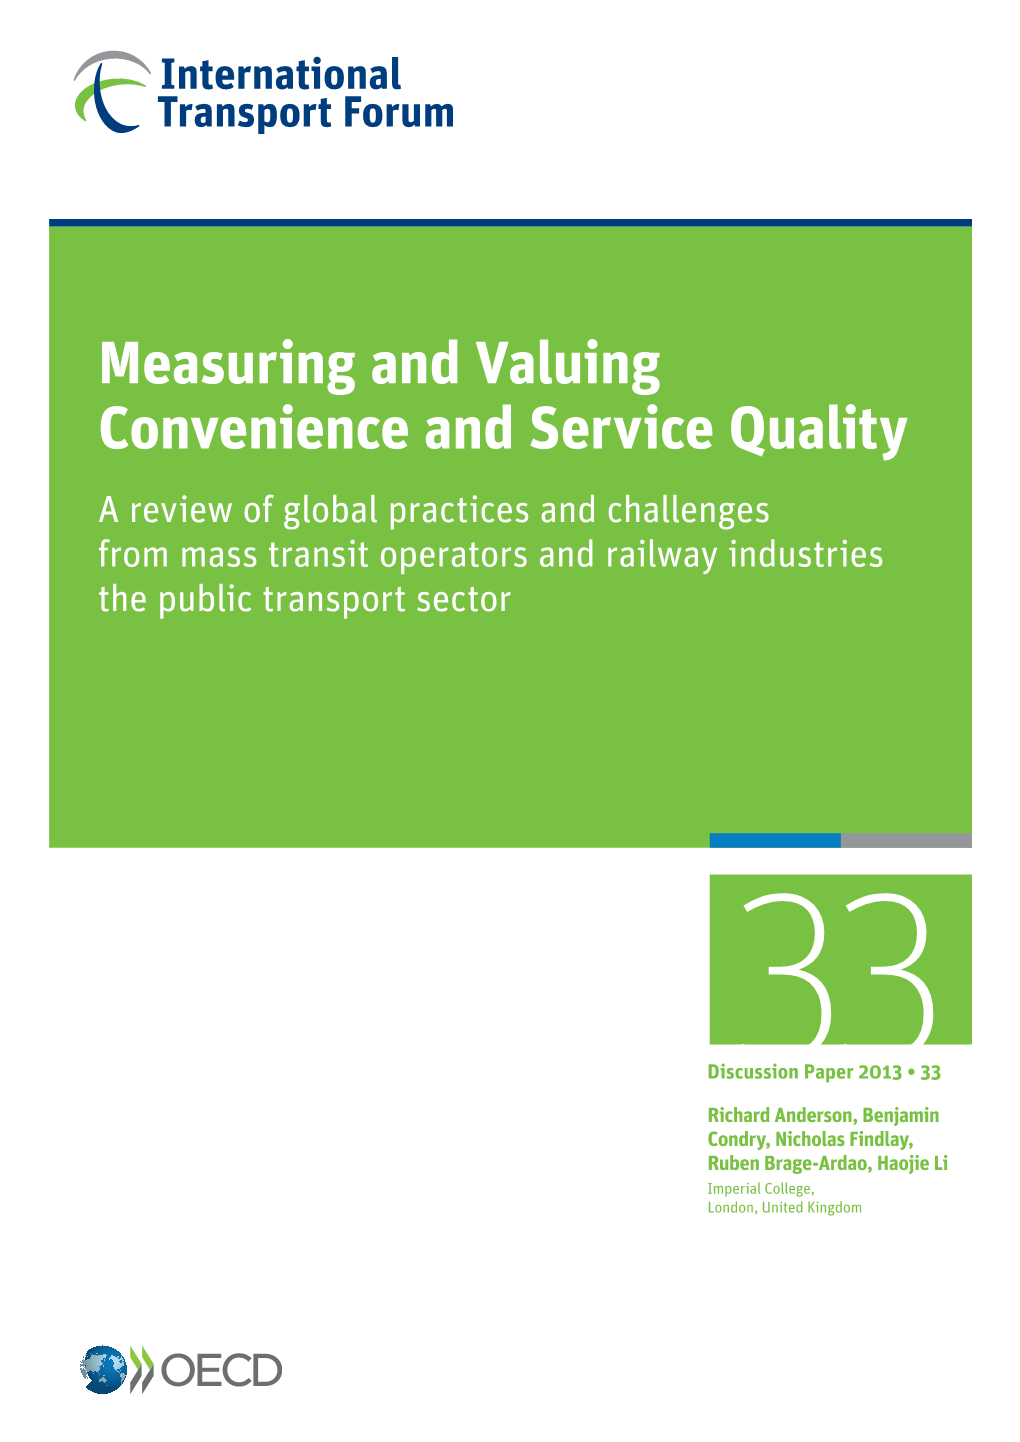 Measuring and Valuing Convenience and Service Quality